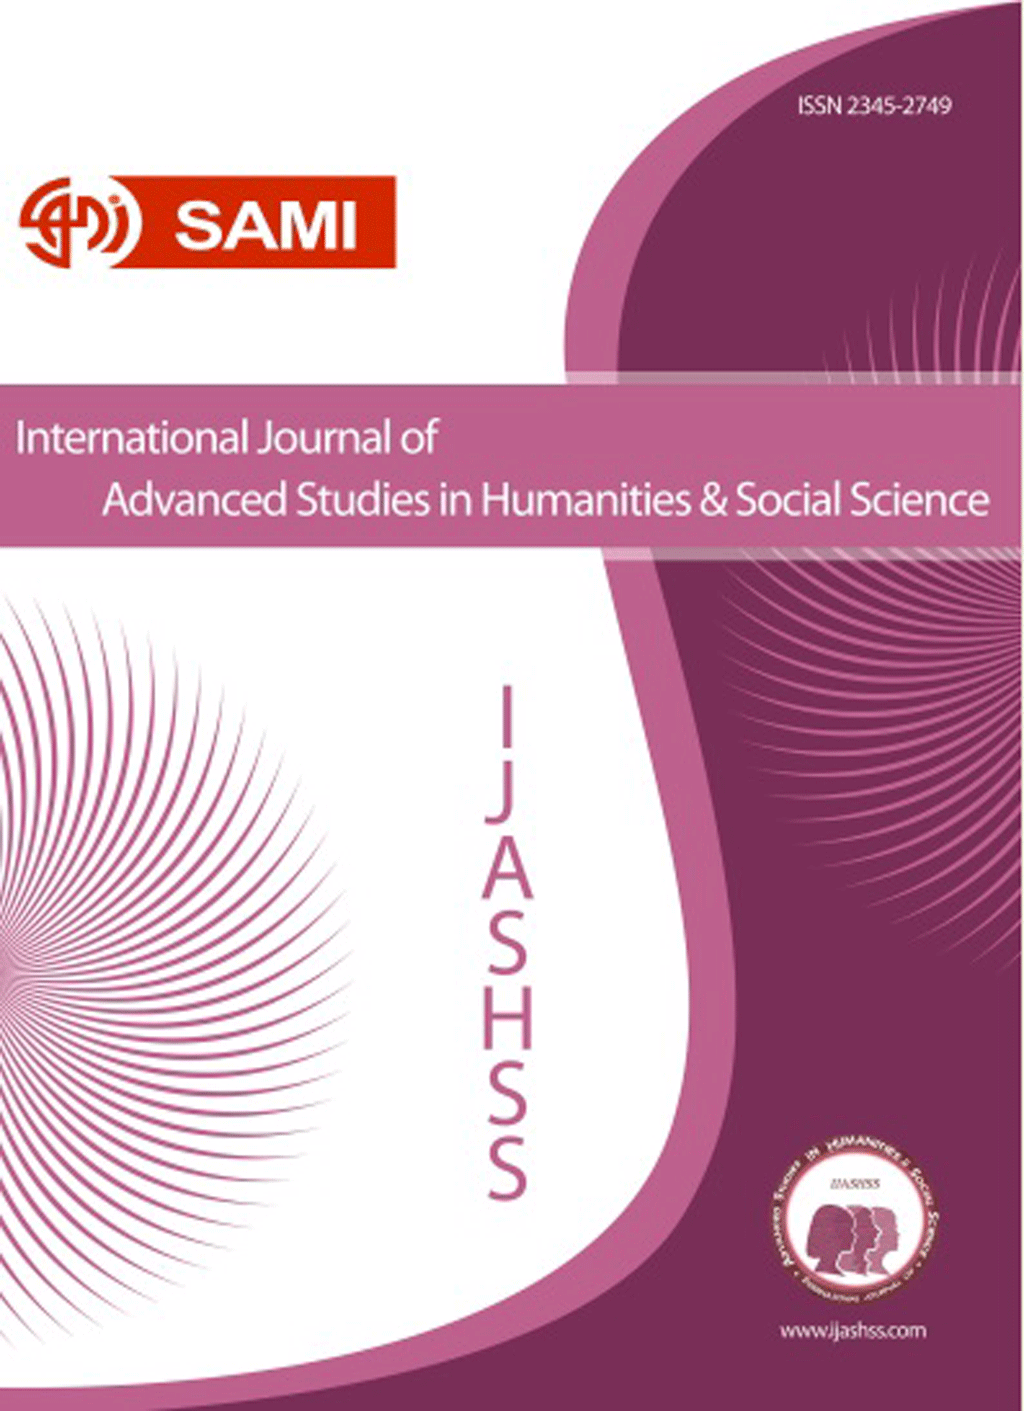 International Journal of Advanced Studies in Humanities and Social Science - October 2017, Volume 6 -  Issue 4